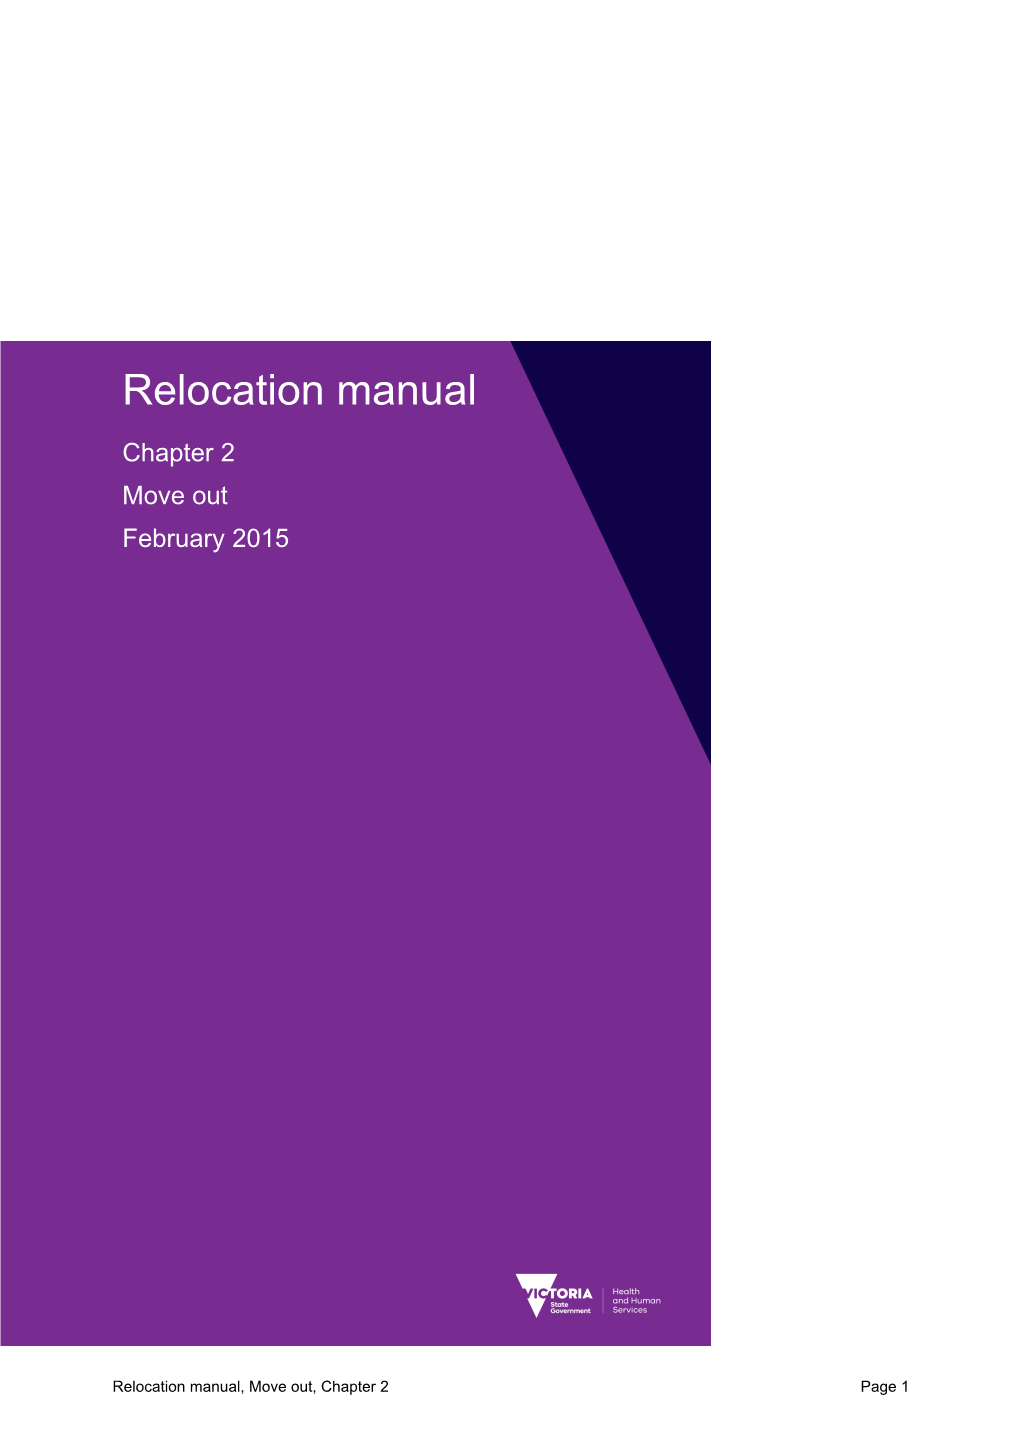 Relocation Manual, Move Out, Chapter 2